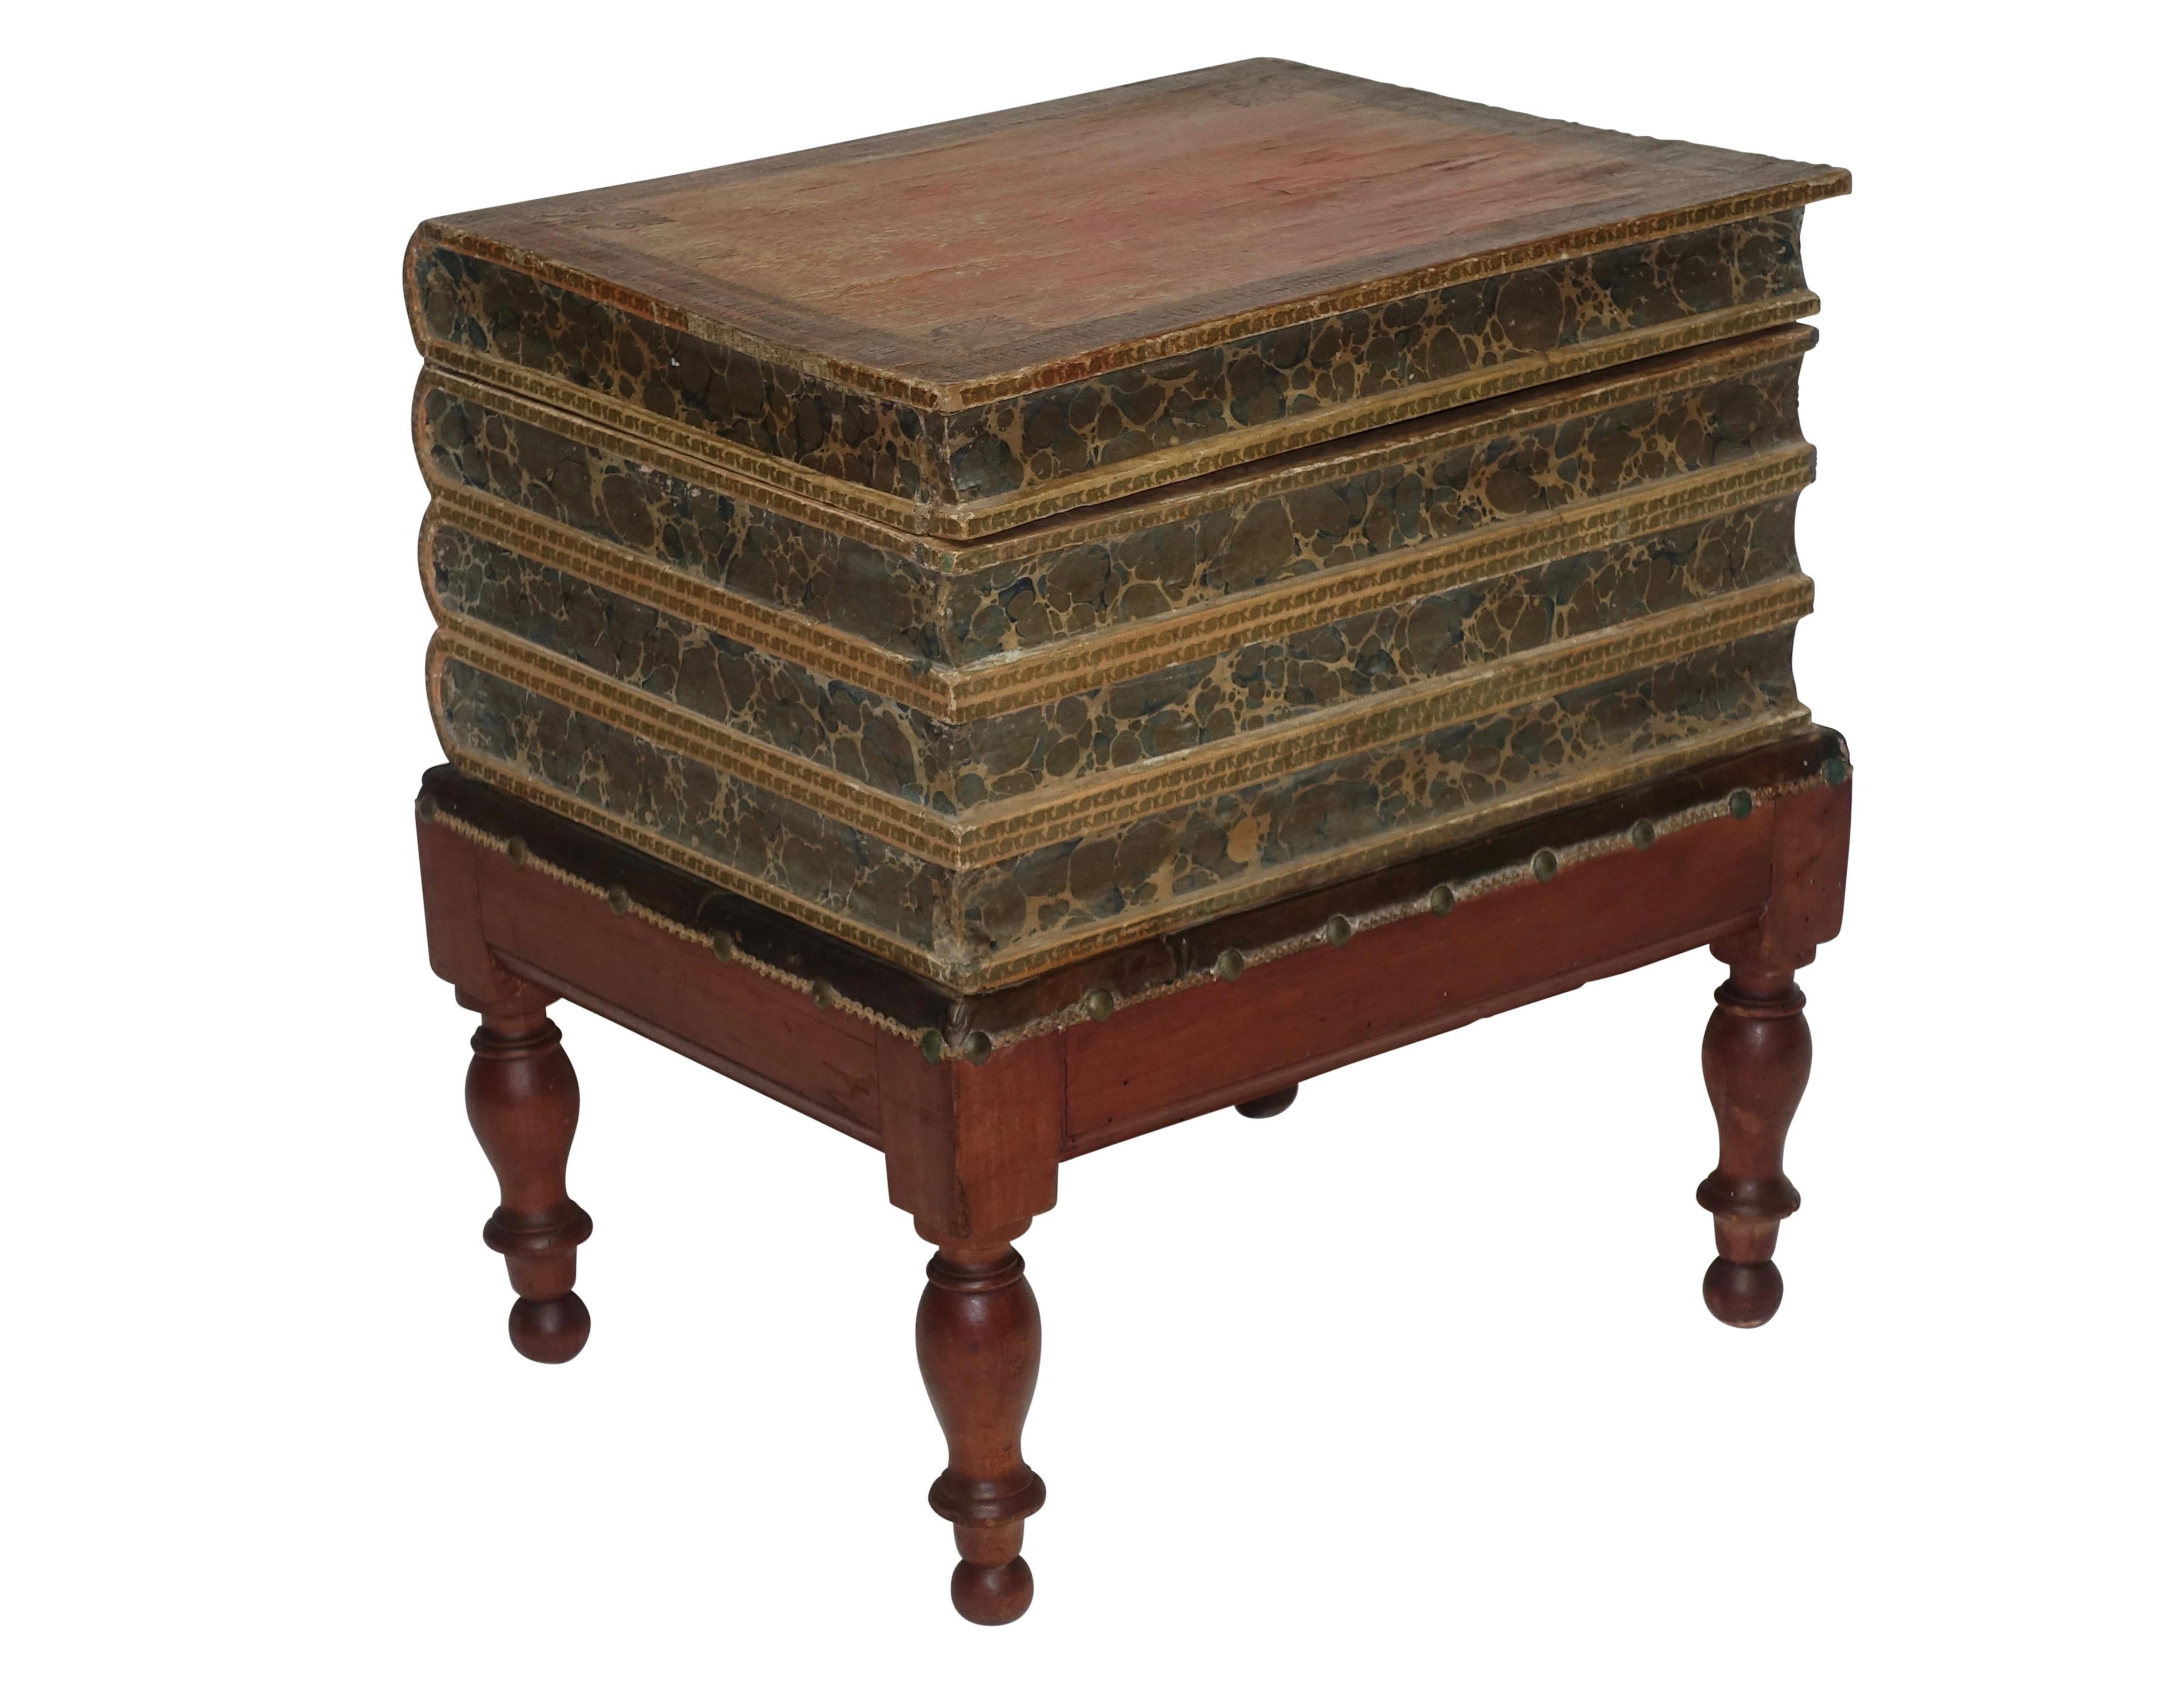 Regency Leather Faux Book Box on Painted Stand or End Table, English, circa 1830 In Good Condition For Sale In San Francisco, CA